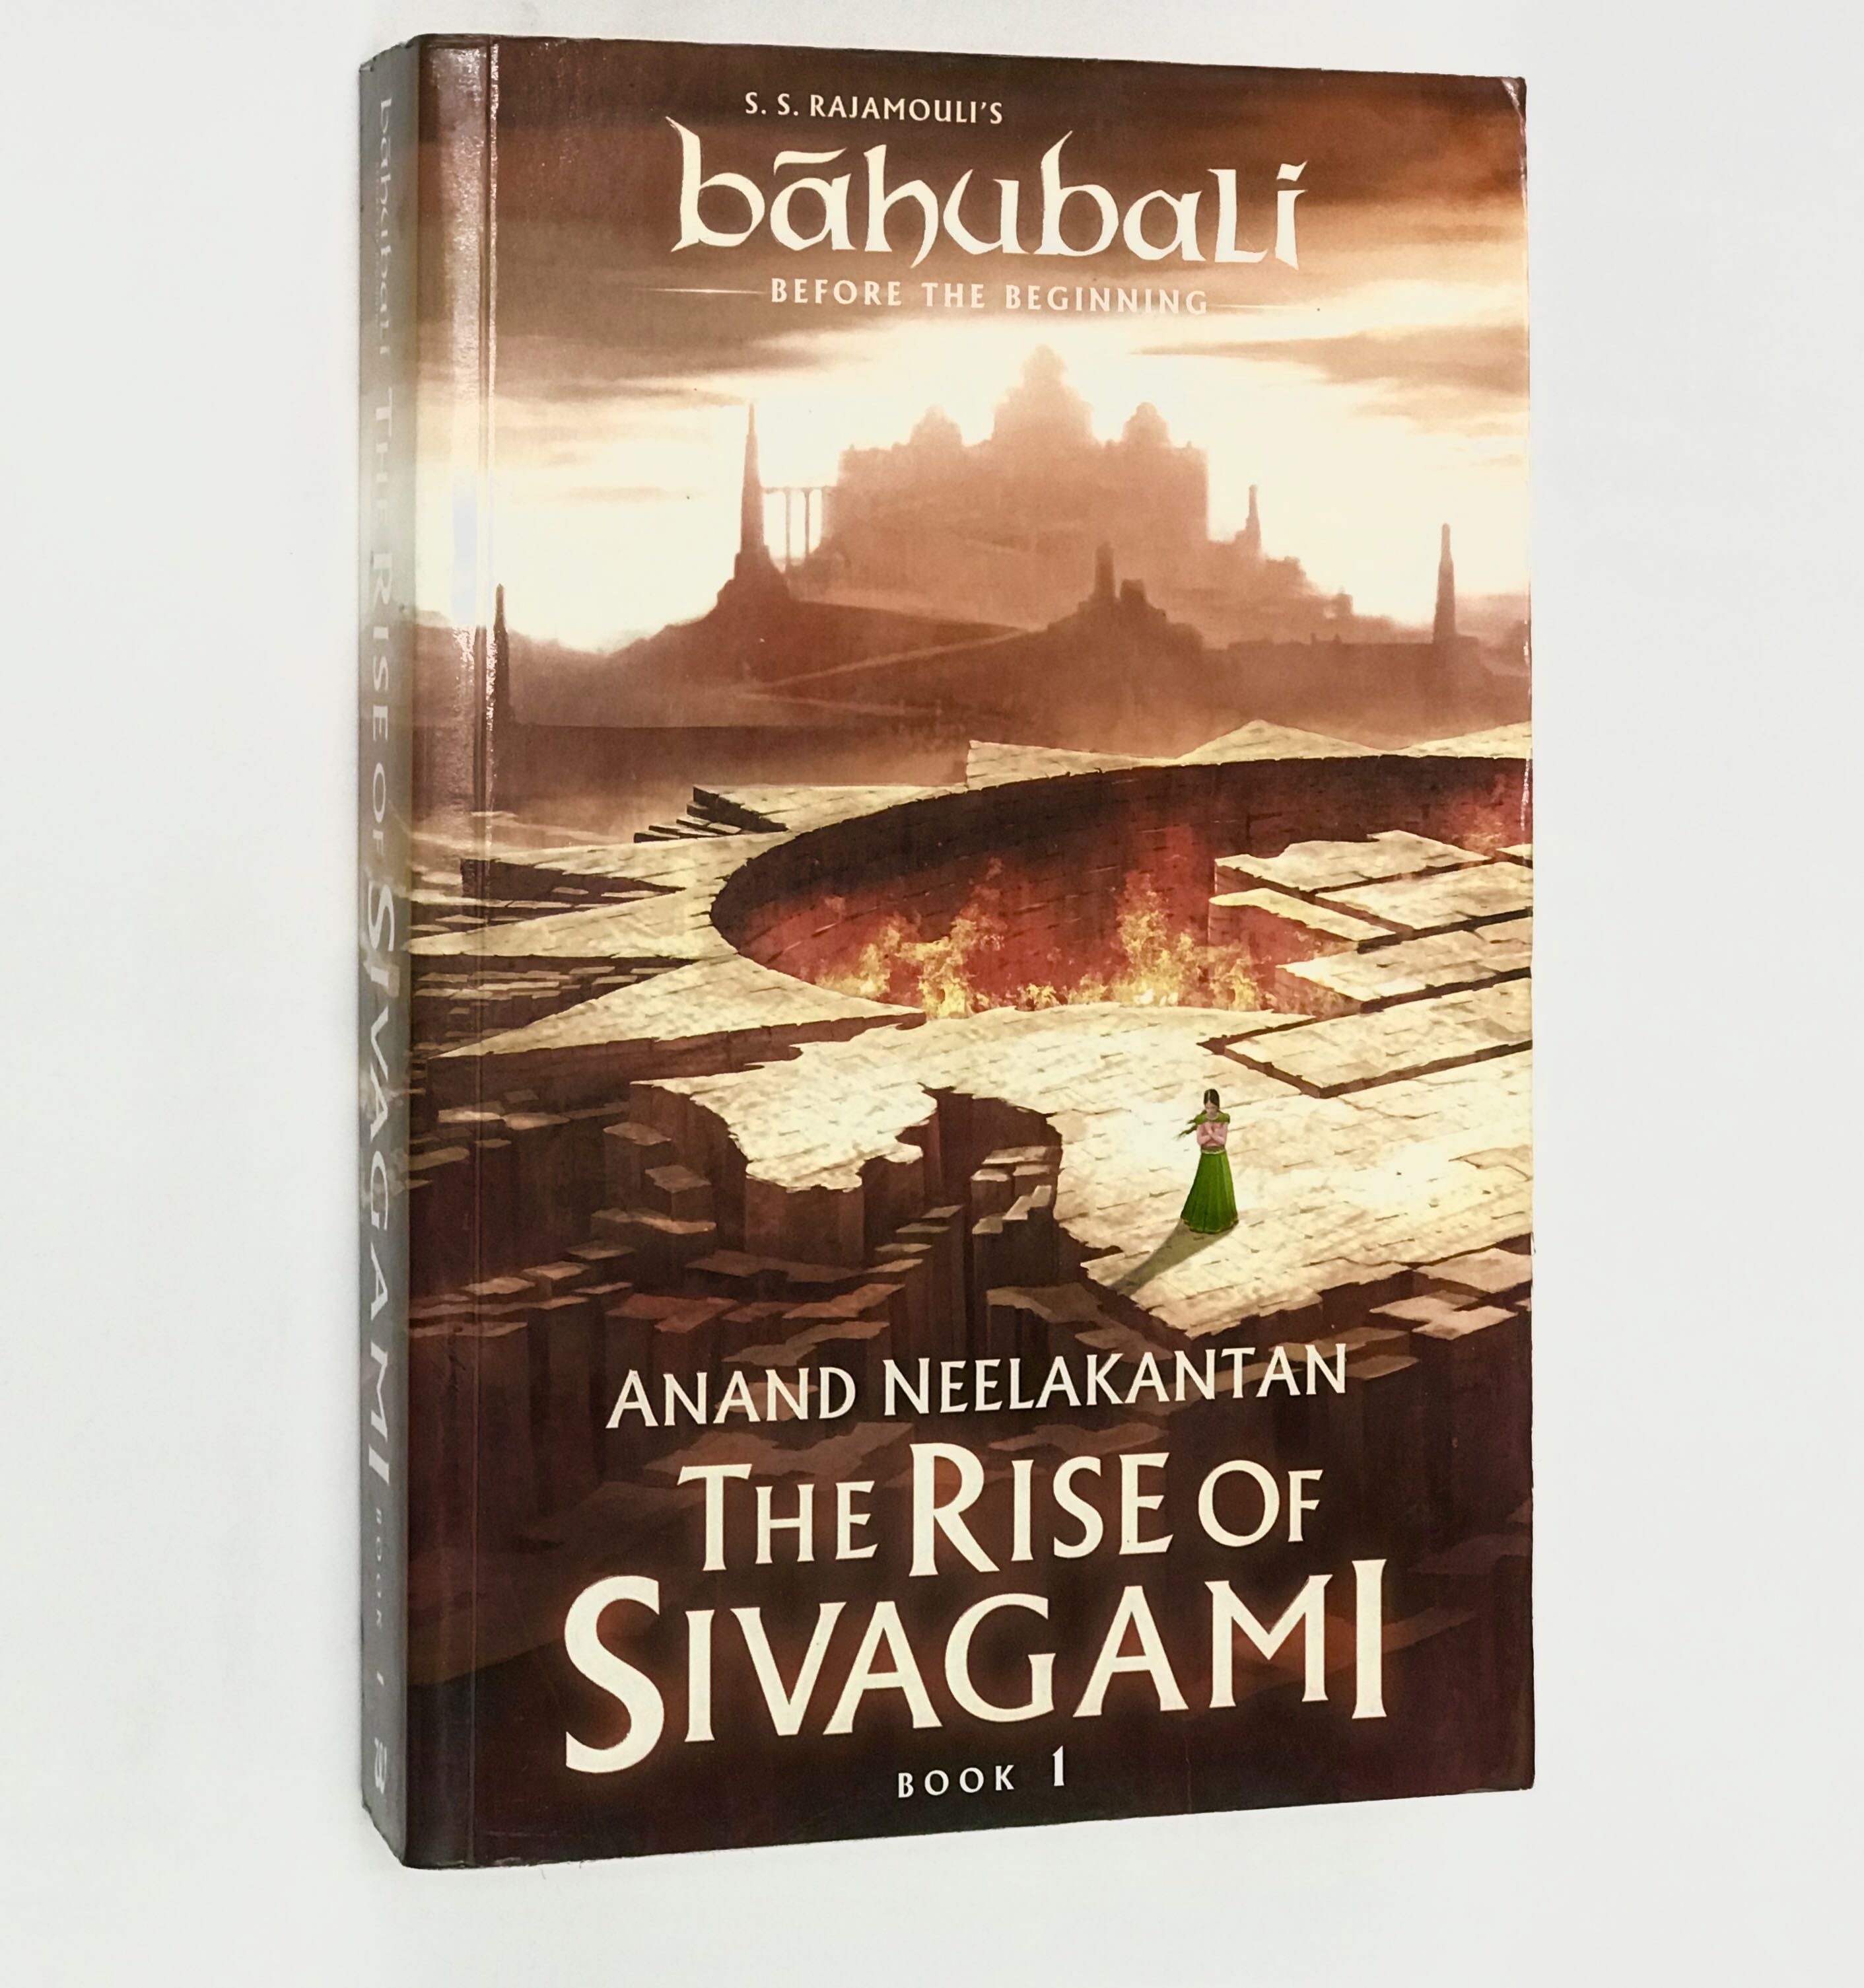 Book Bahubali The Rise Of Sivagami Hobbies Toys Books Magazines Children S Books On Carousell